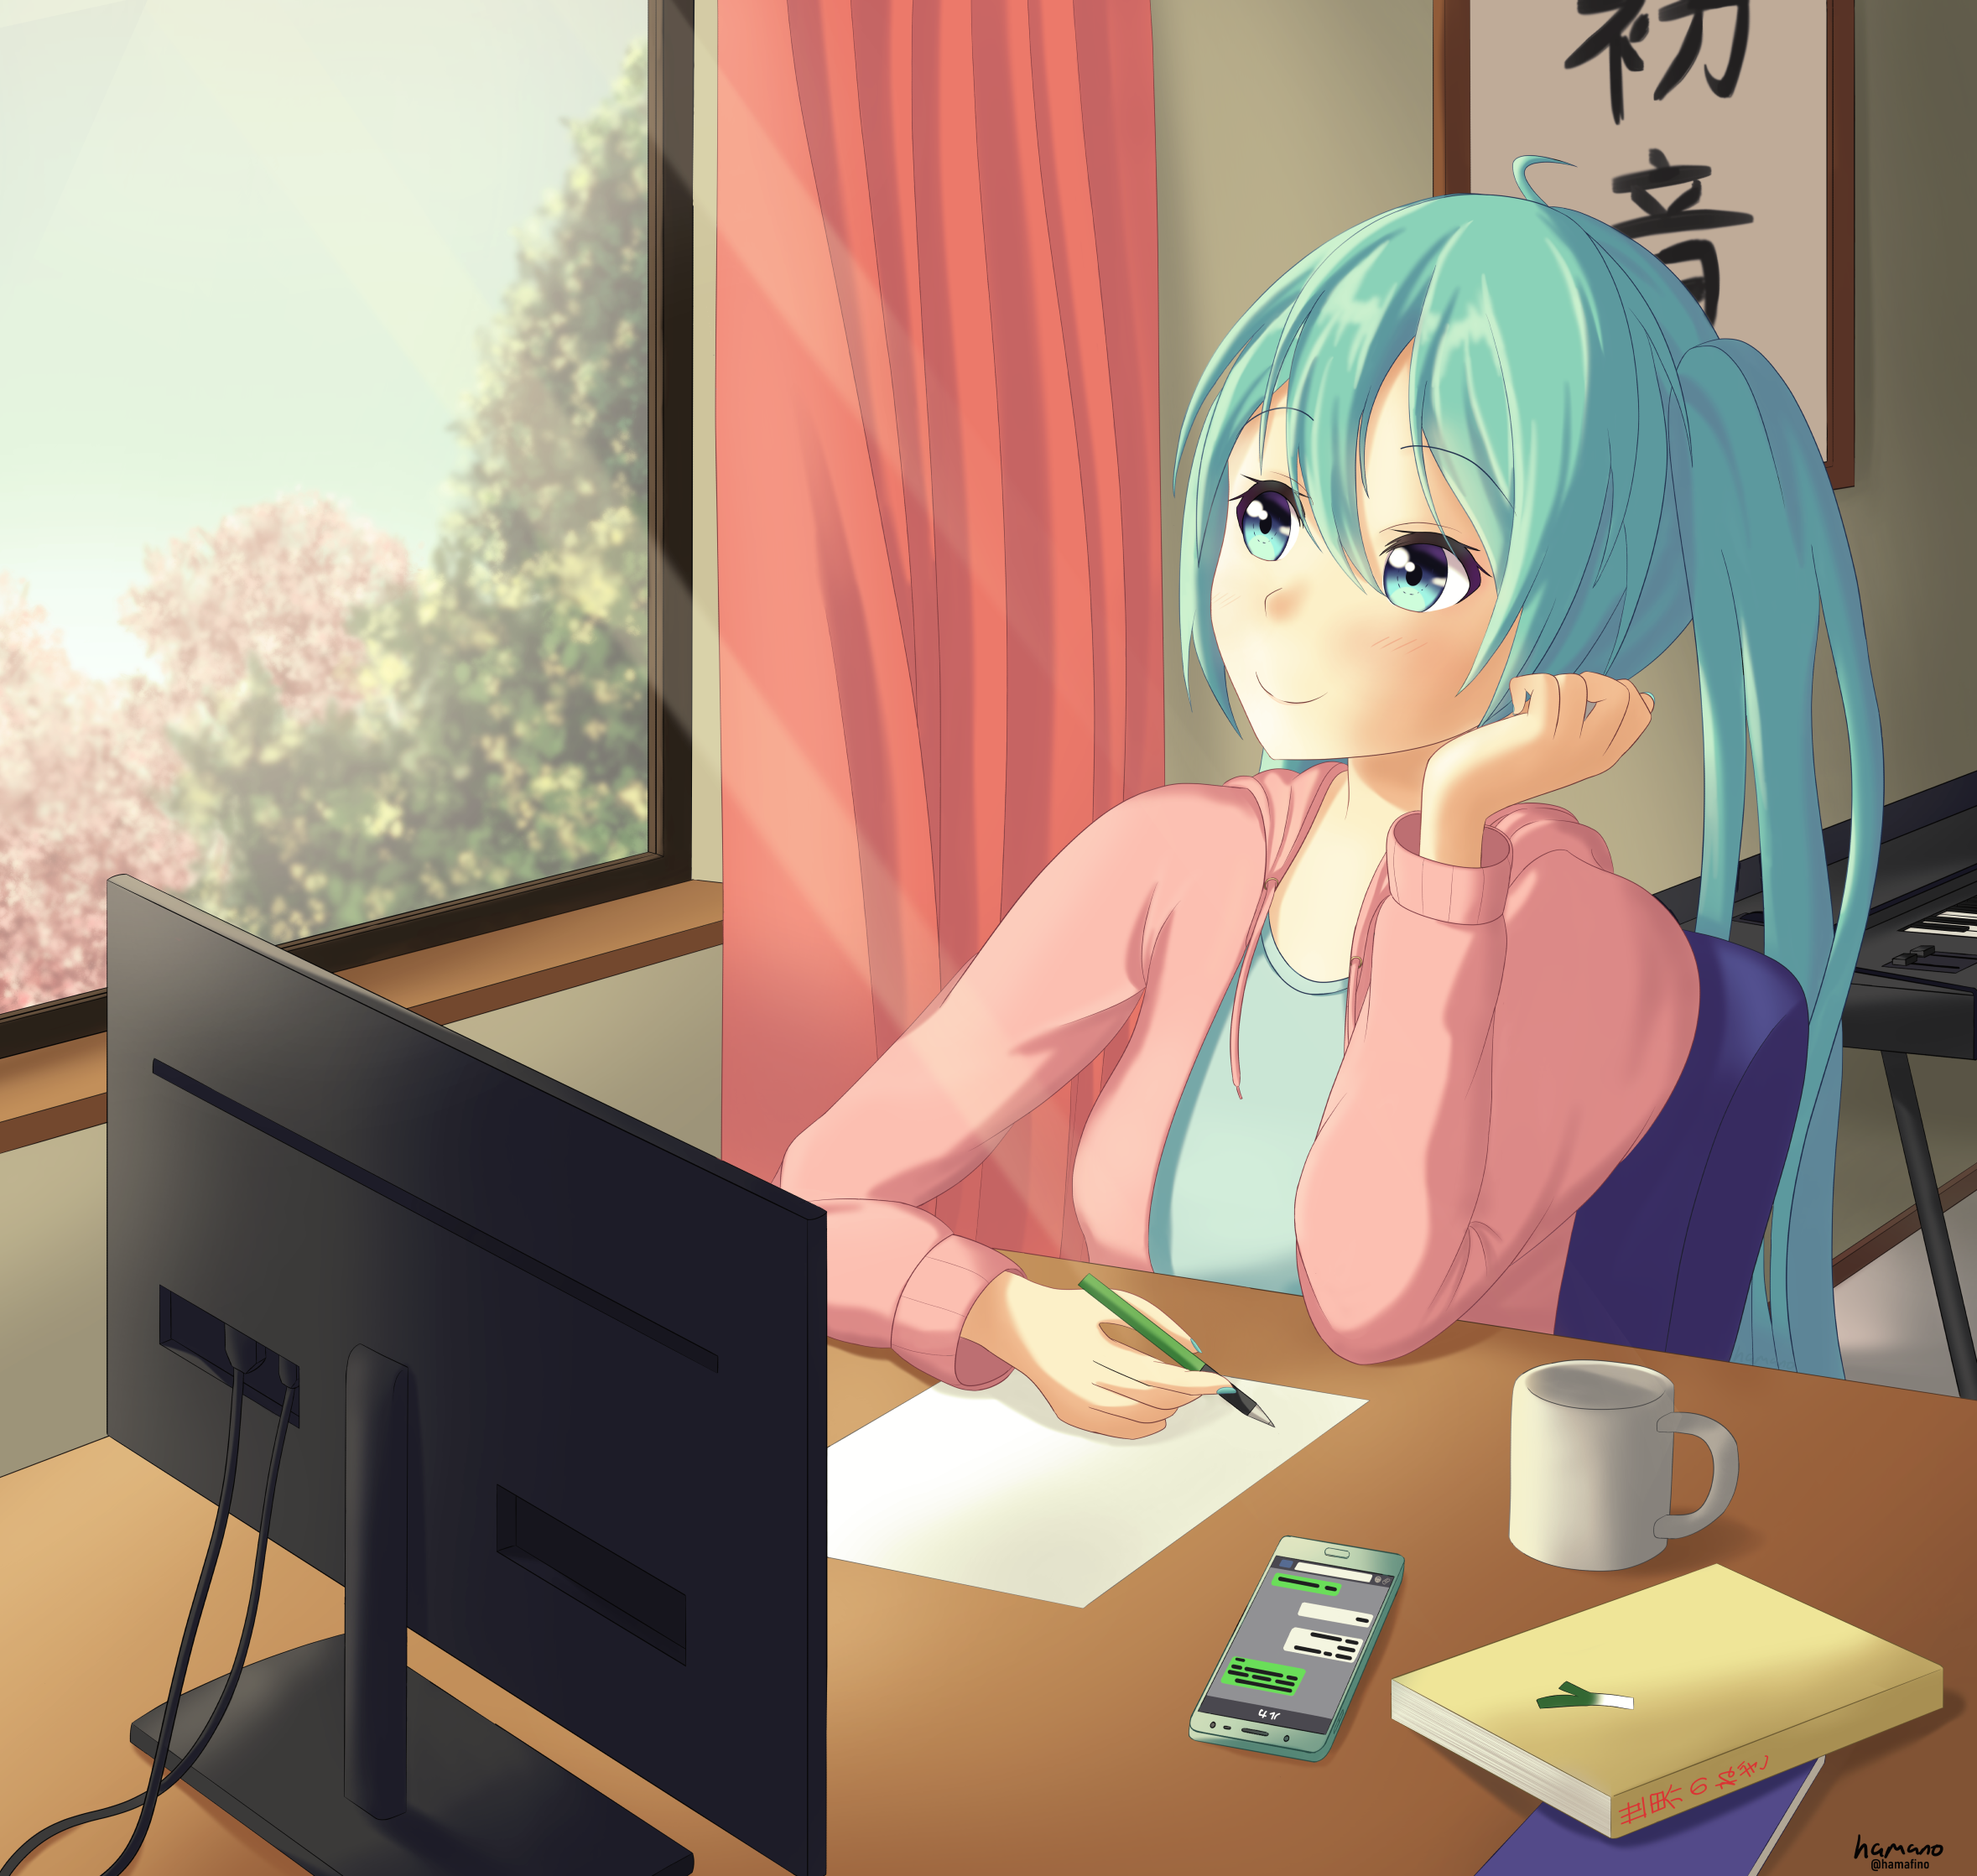 At home with Miku